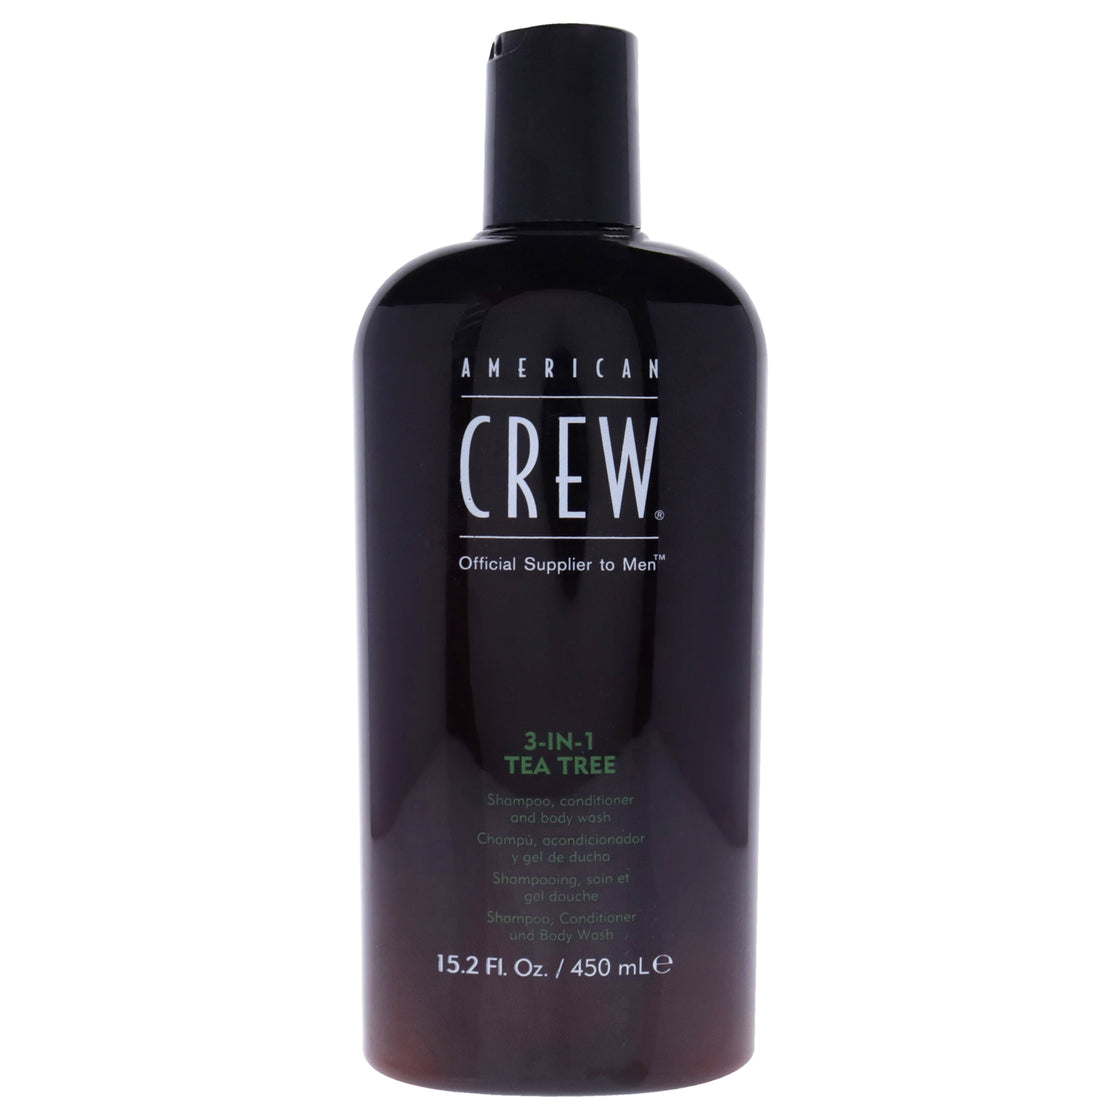 3-In-1 Tea Tree Shampoo and Conditioner and Body Wash by American Crew for Men - 15.2 oz Shampoo, Conditioner and Body Wash